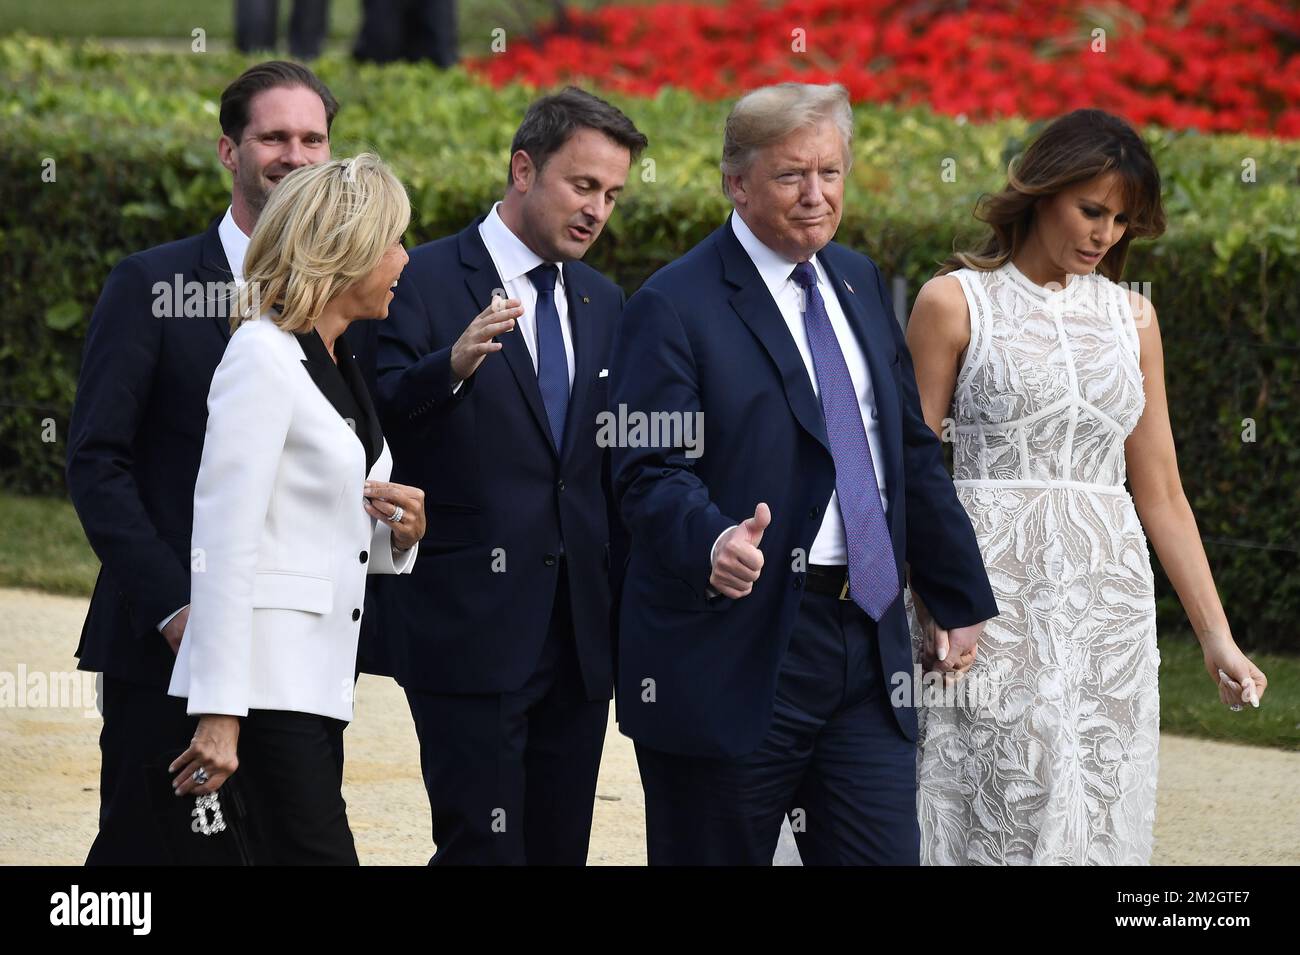 Brigitte Macron, Gauthier Destenay, husband of Luxembourg PM, Prime Minister of Luxembourg Xavier Bettel, US President Donald Trump and First Lady of the US Melania Trump arrive for a dinner at the Parc du Cinquantenaire - Jubelpark park in Brussels, for the participants of a NATO (North Atlantic Treaty Organization) summit, Wednesday 11 July 2018. BELGA PHOTO ERIC LALMAND  Stock Photo